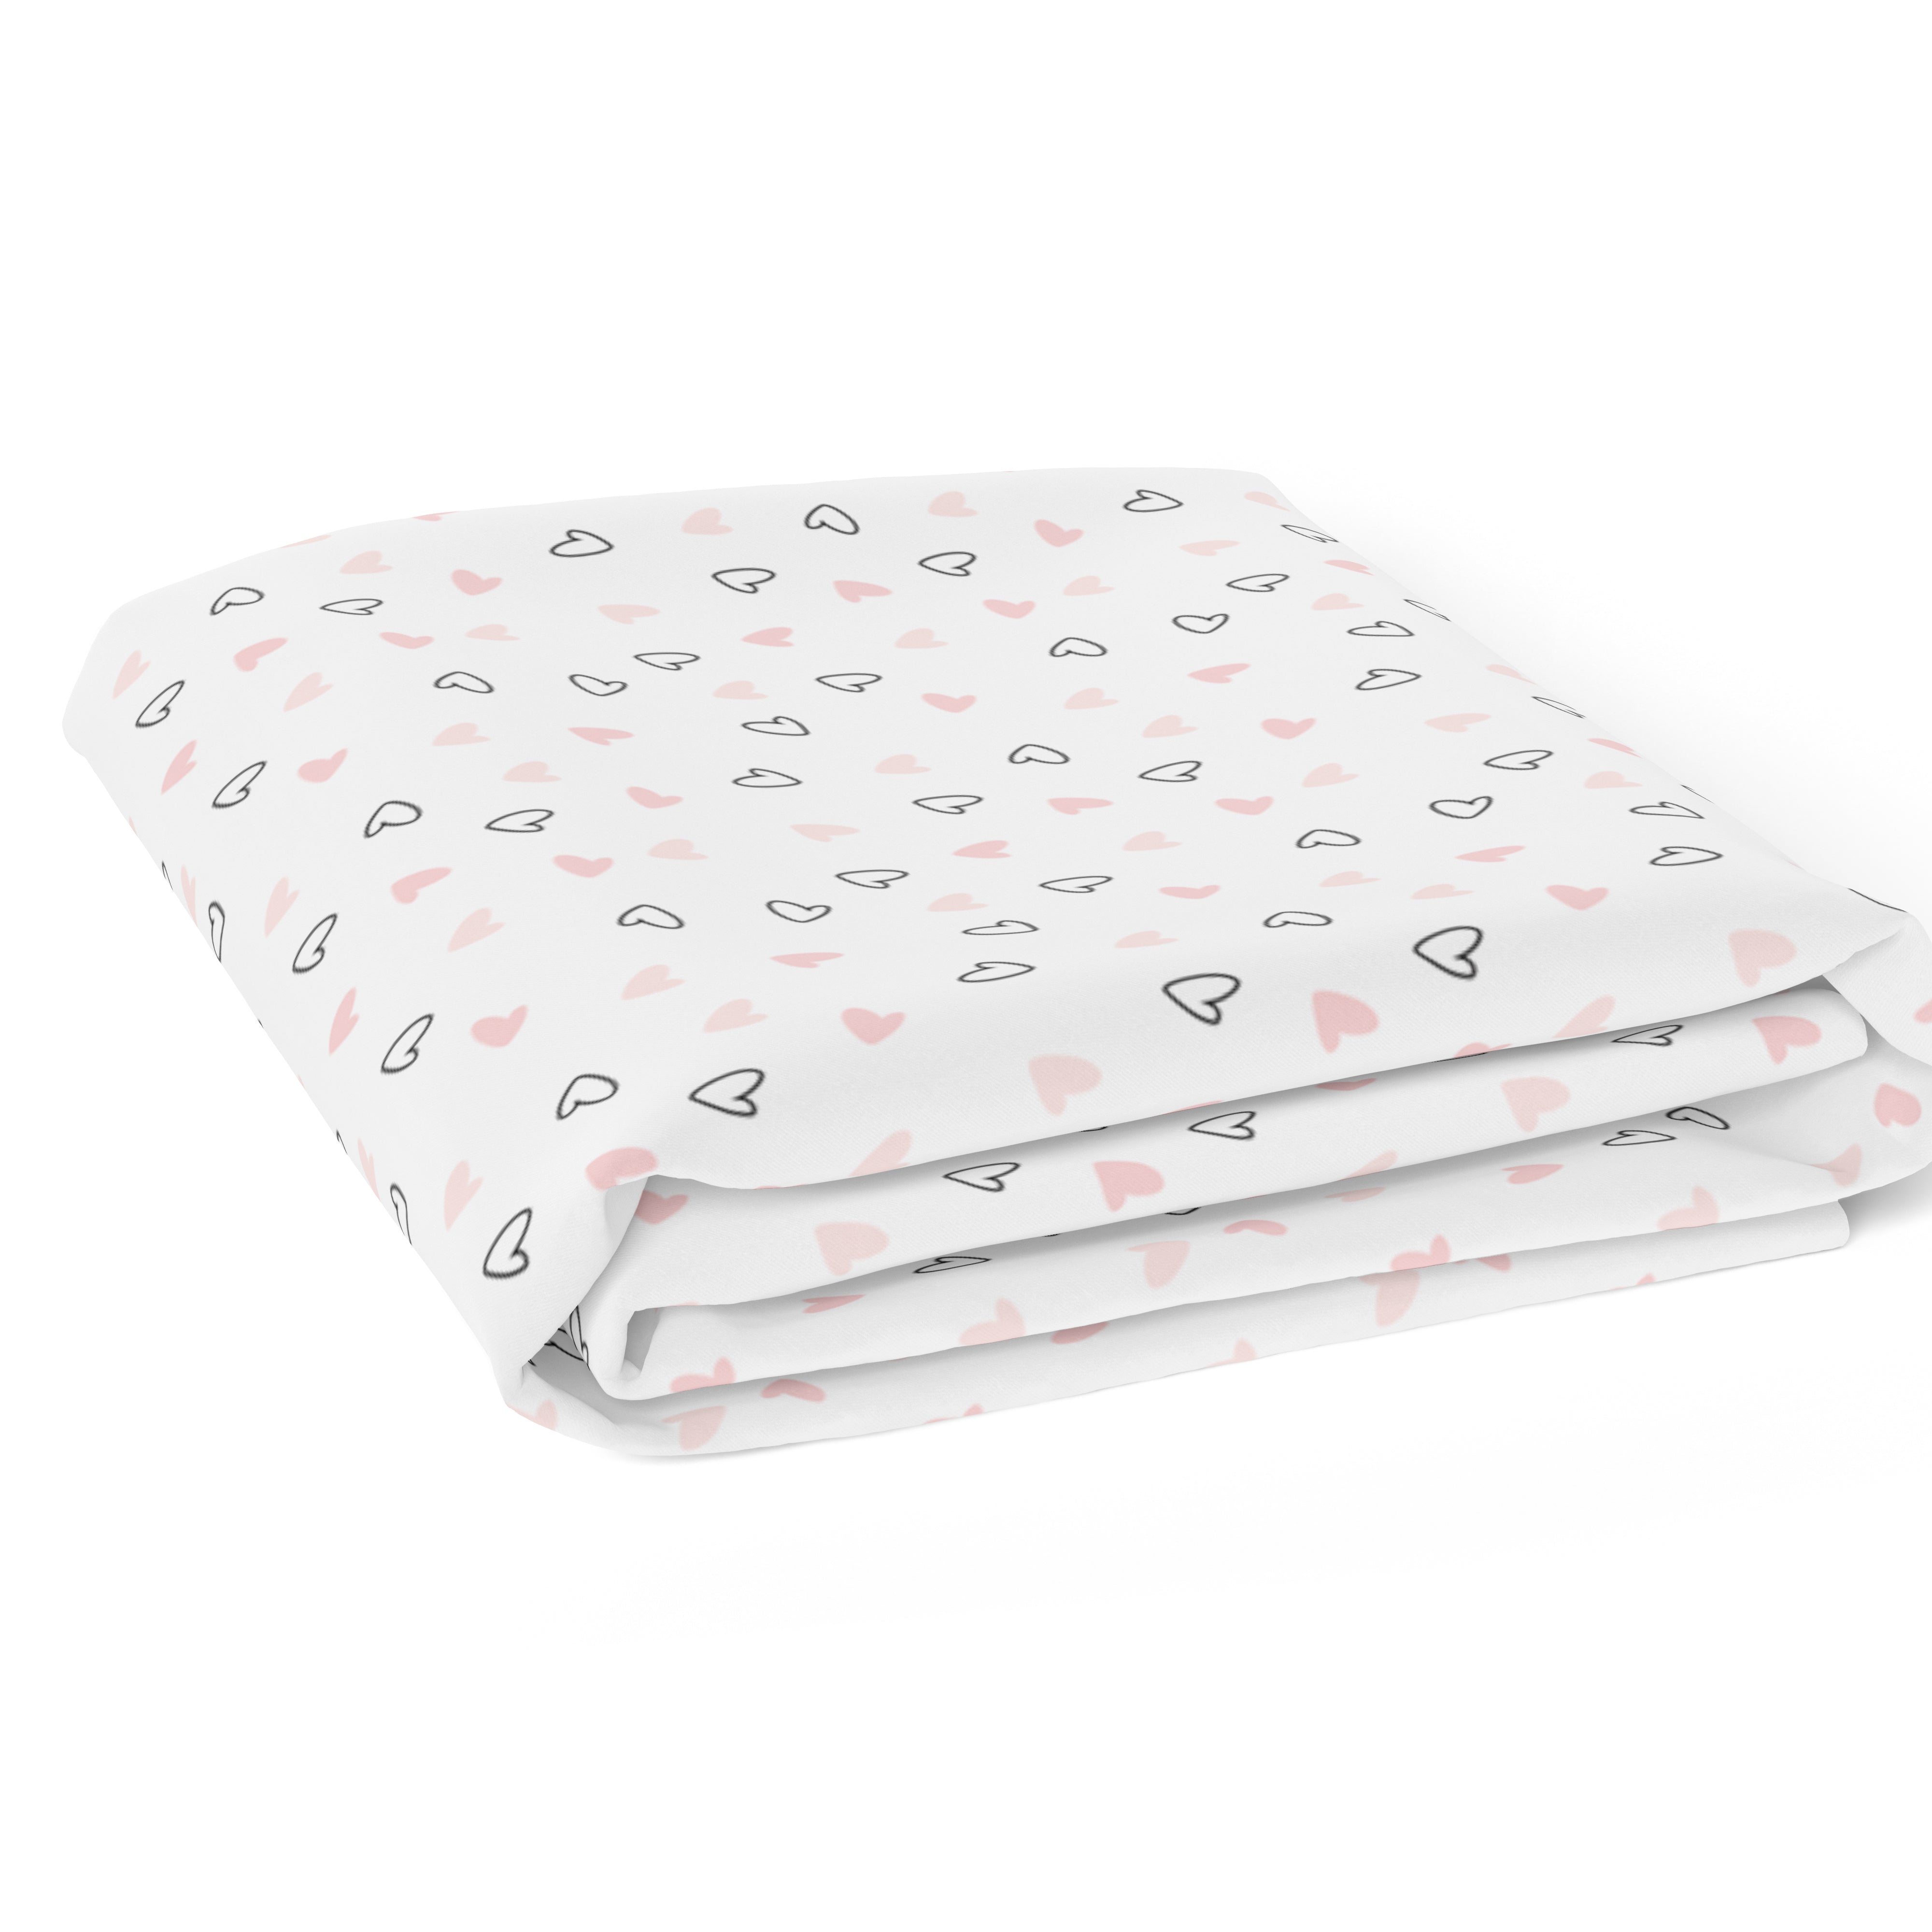 The White Cradle 100% Organic Cotton Crib Fitted Sheets for Baby - Pink Hearts and Bows (Large)